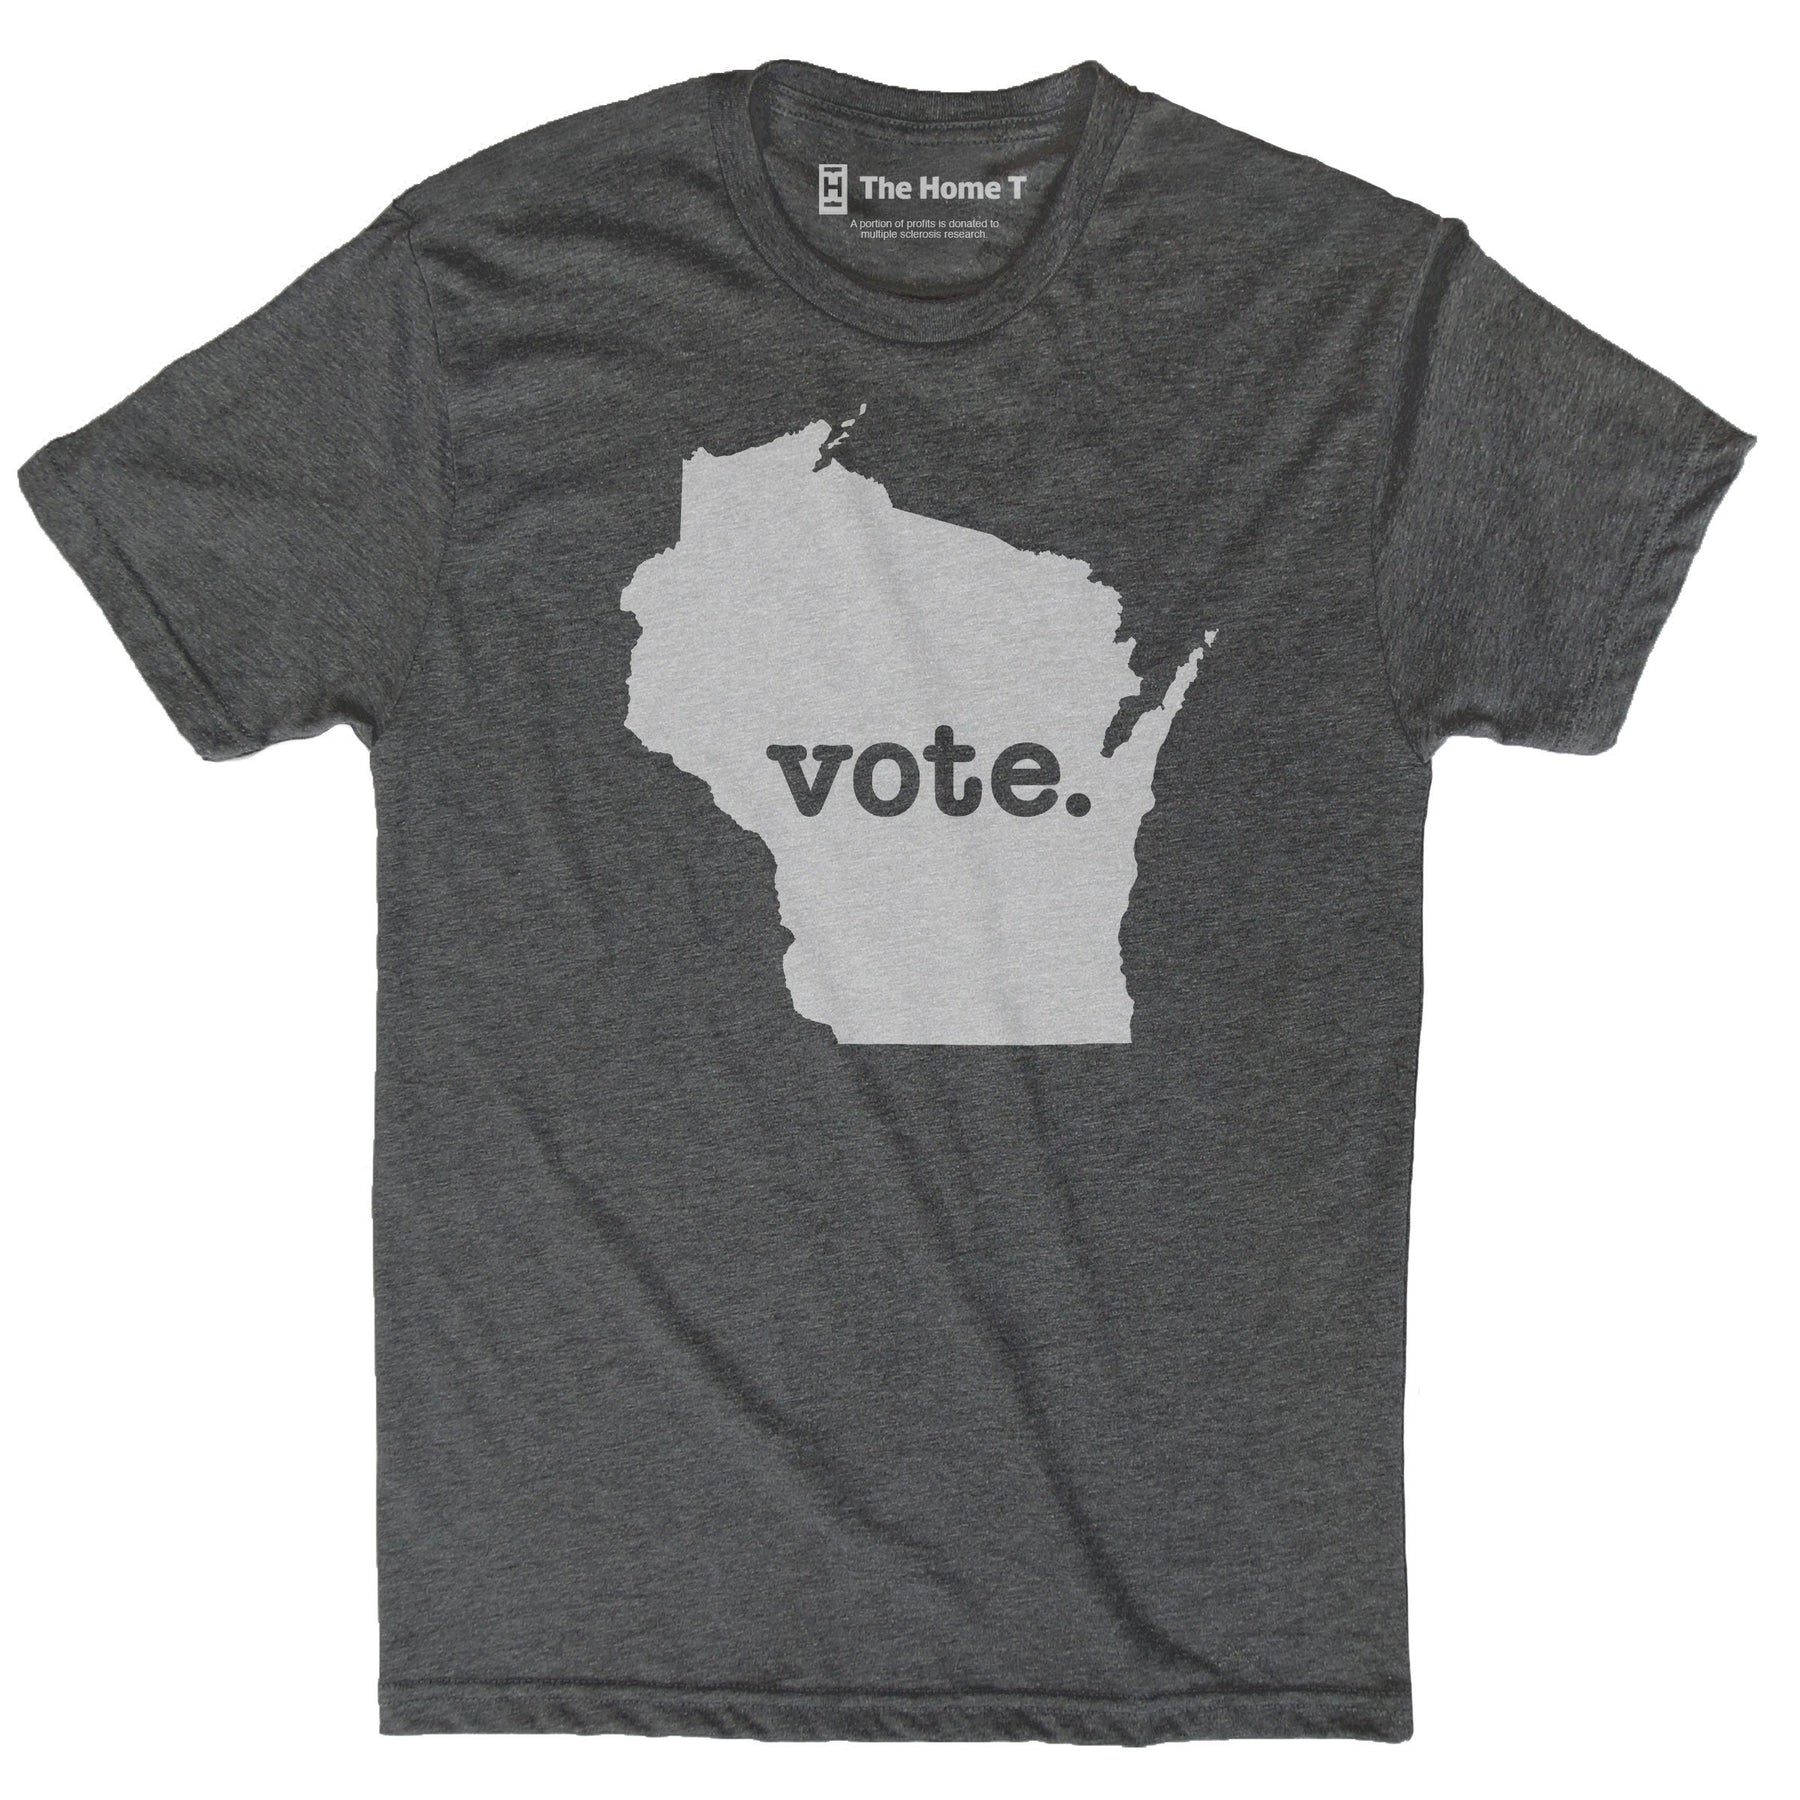 Wisconsin Vote Home T Vote The Home T XS Grey